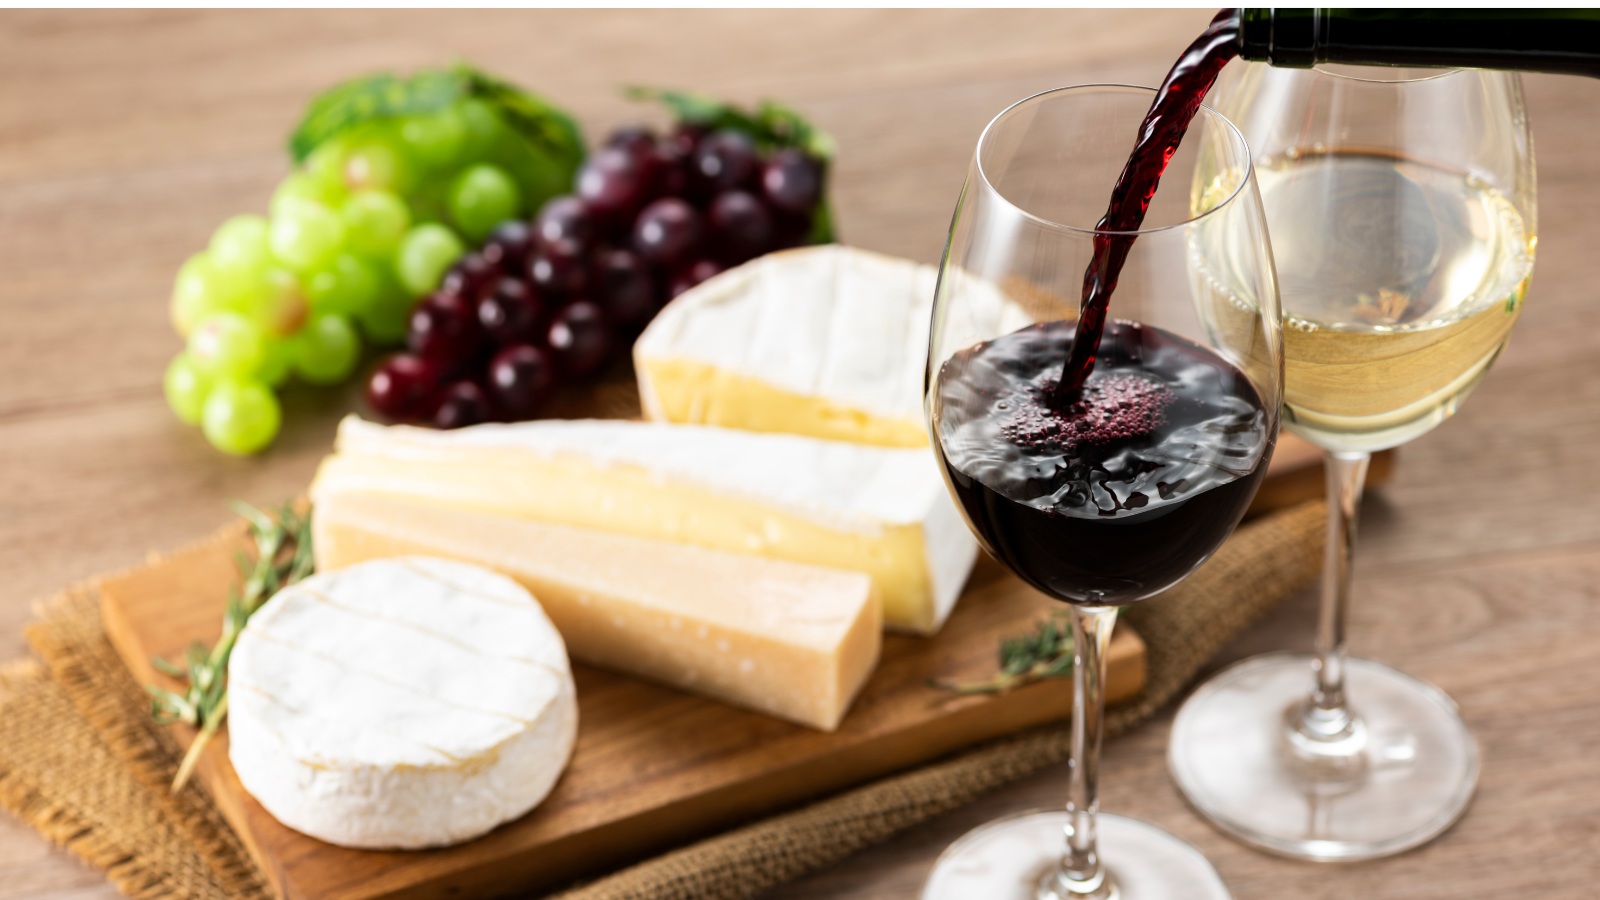 Top 5 Reasons Cheese, Bread & Wine Are Health Foods